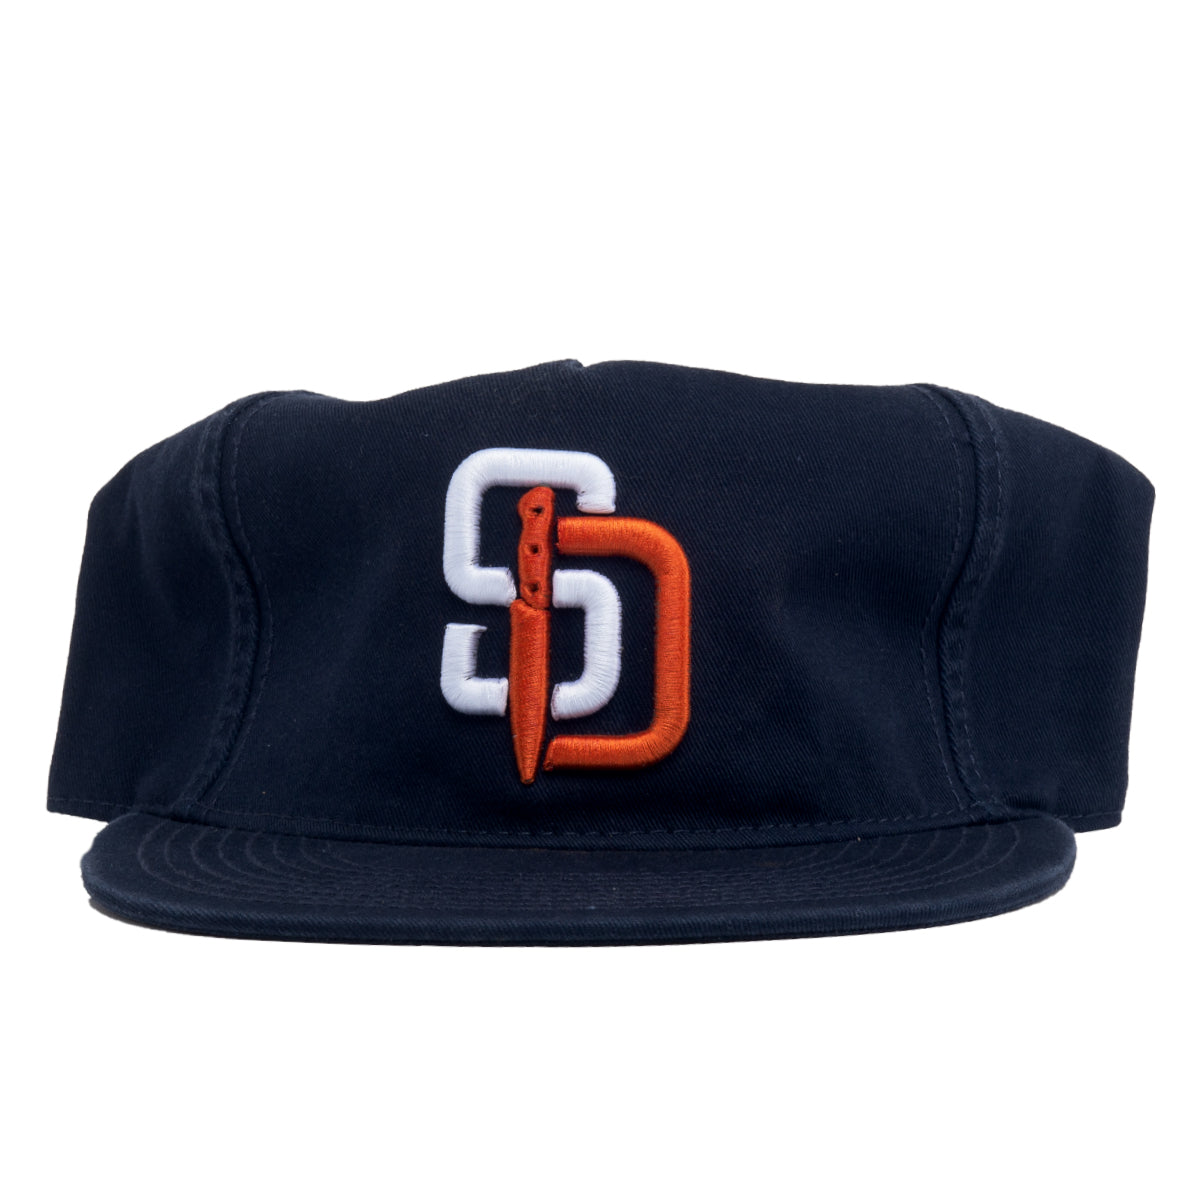 Stab Diego - Navy - 5 Panel - deadview